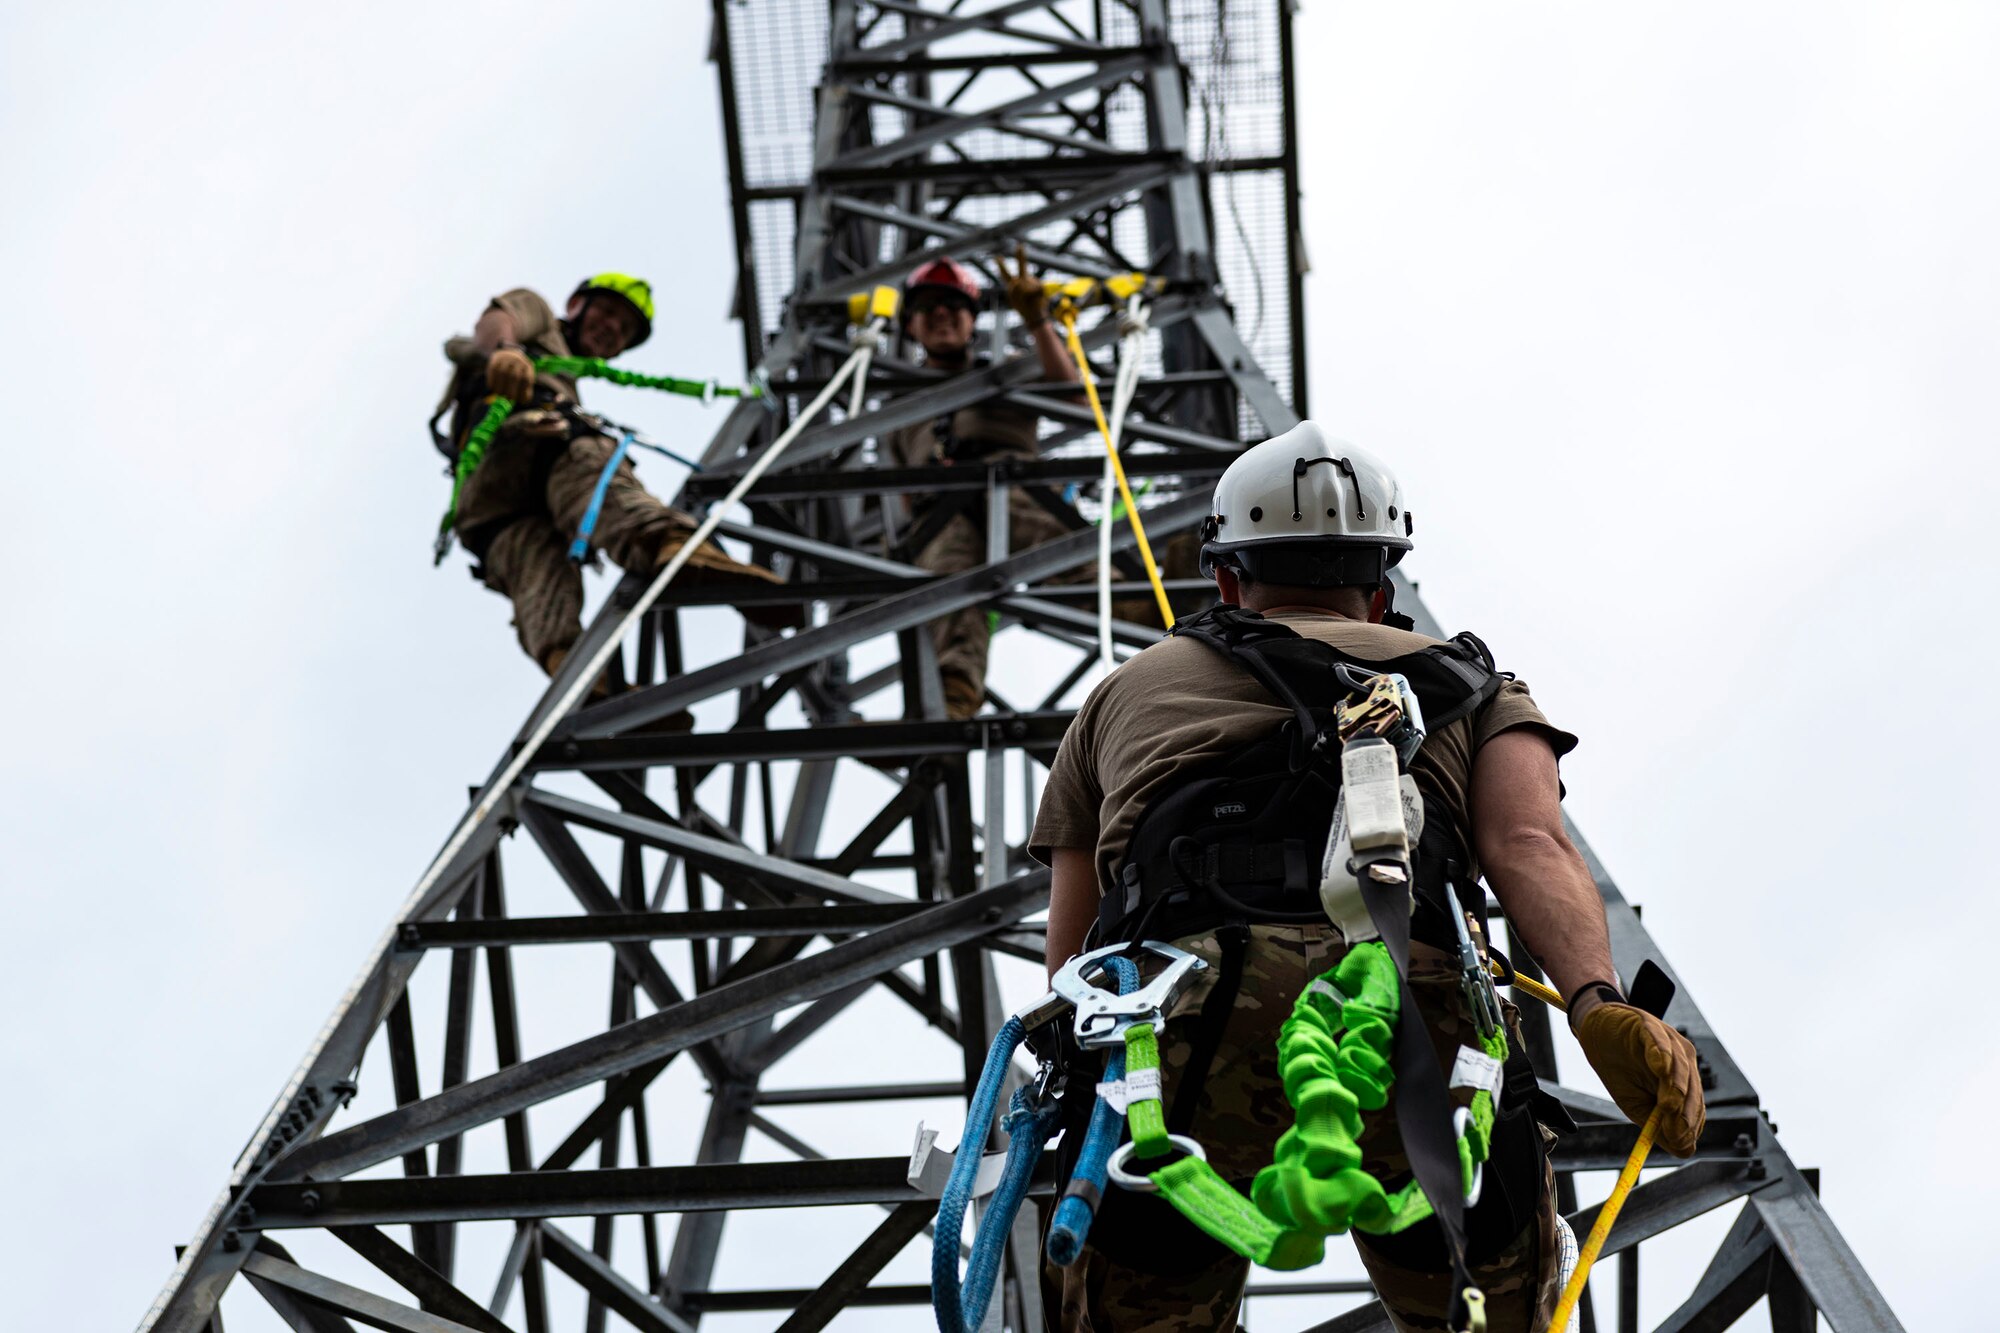 Airfield and weather systems journeyman, and apprentice rappel down a radio antenna tower